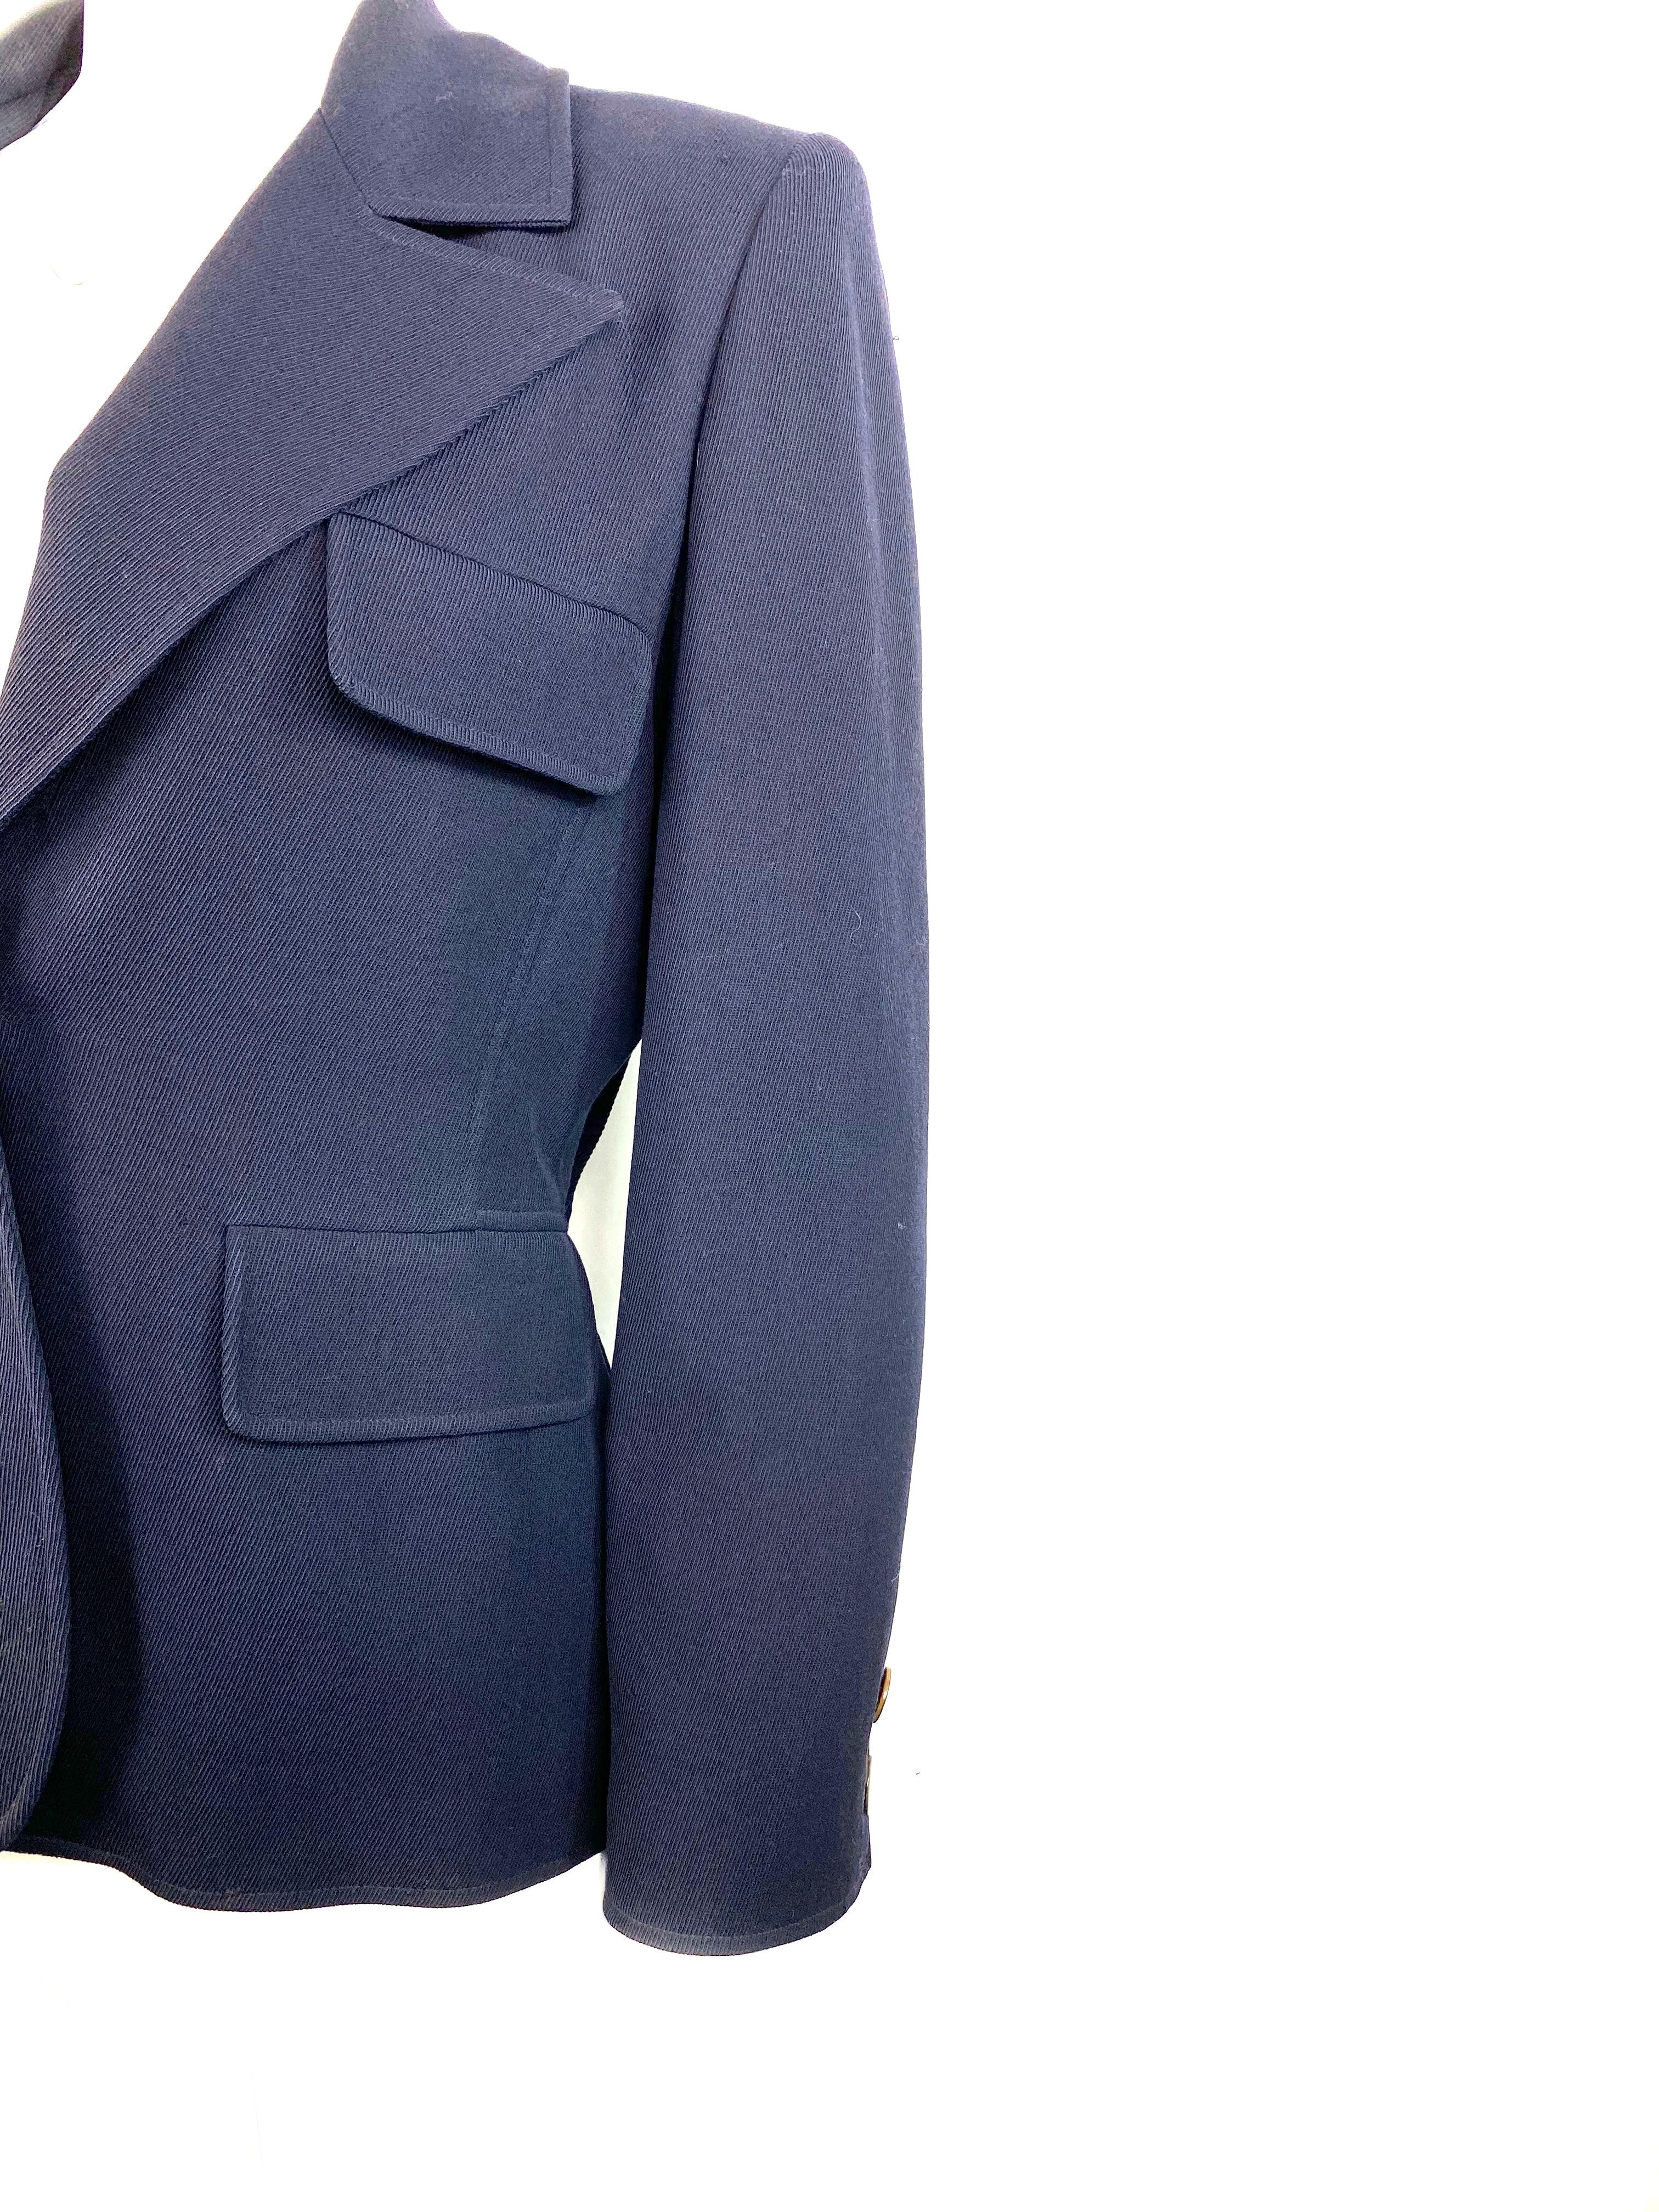 Valentino Boutique Navy Blazer Jacket Size 6 In Excellent Condition For Sale In Beverly Hills, CA